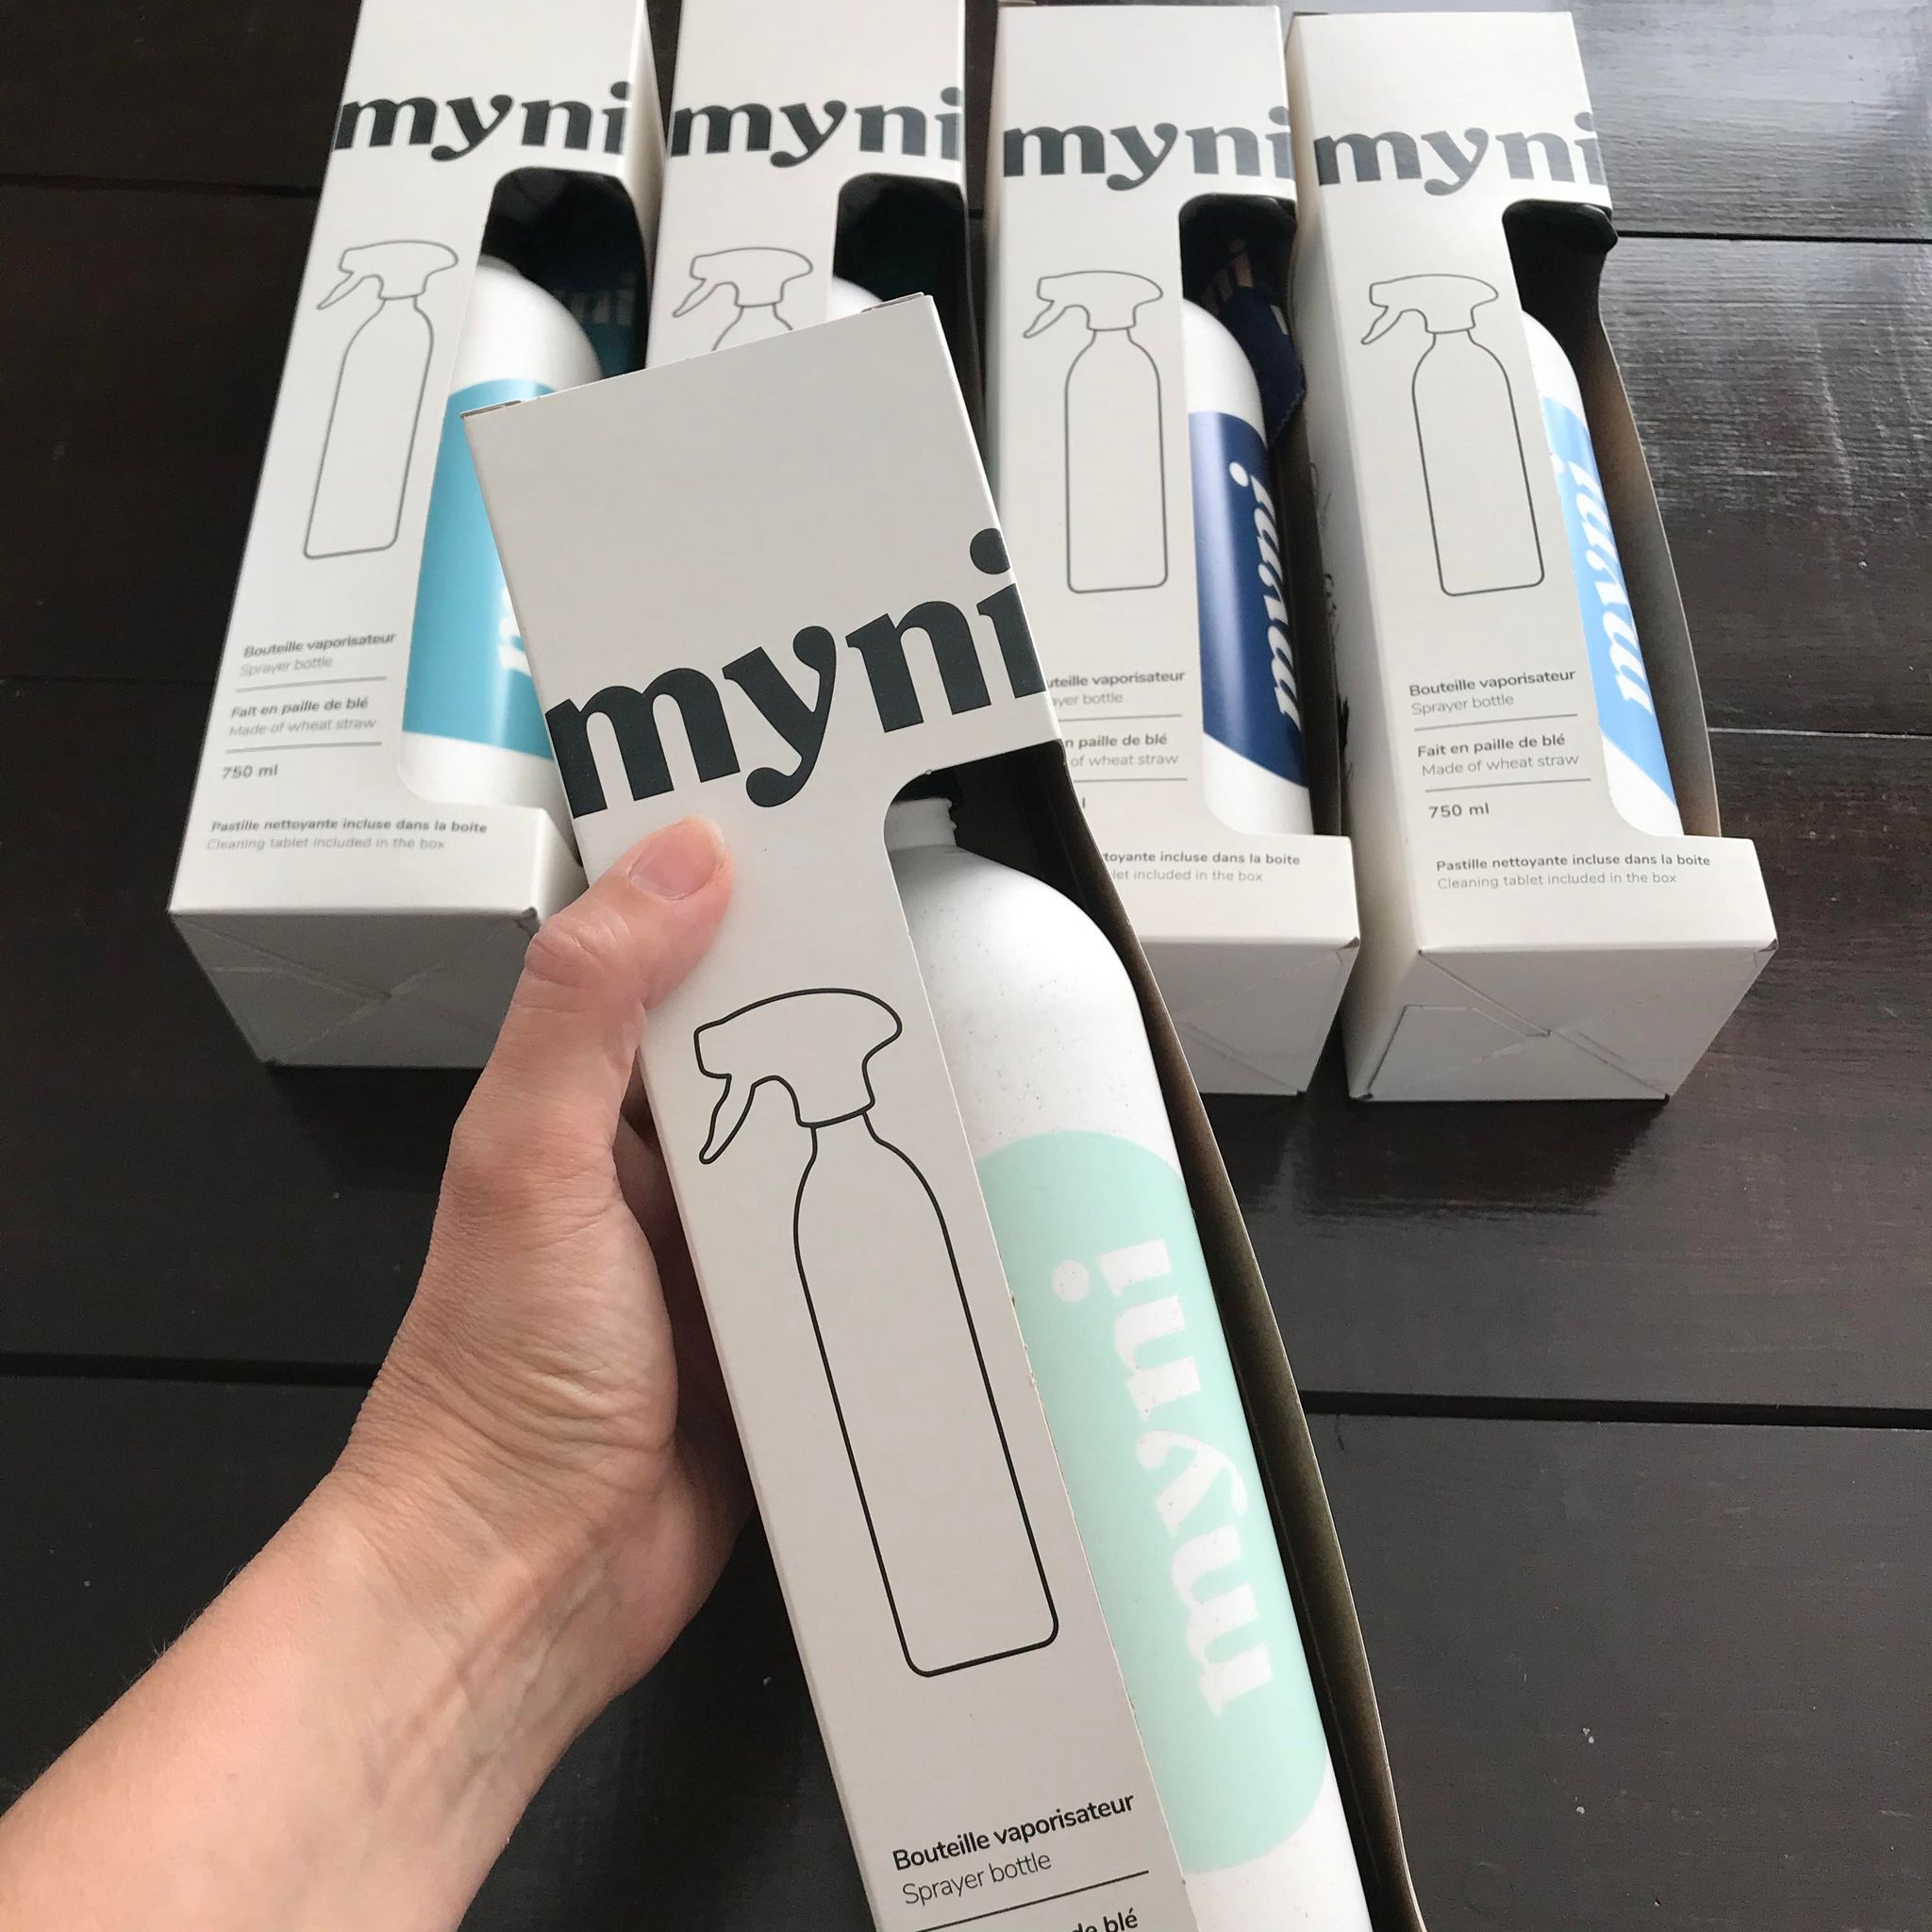 mint green myni cleaner spray bottle in wheat straw 750 ml size with no text